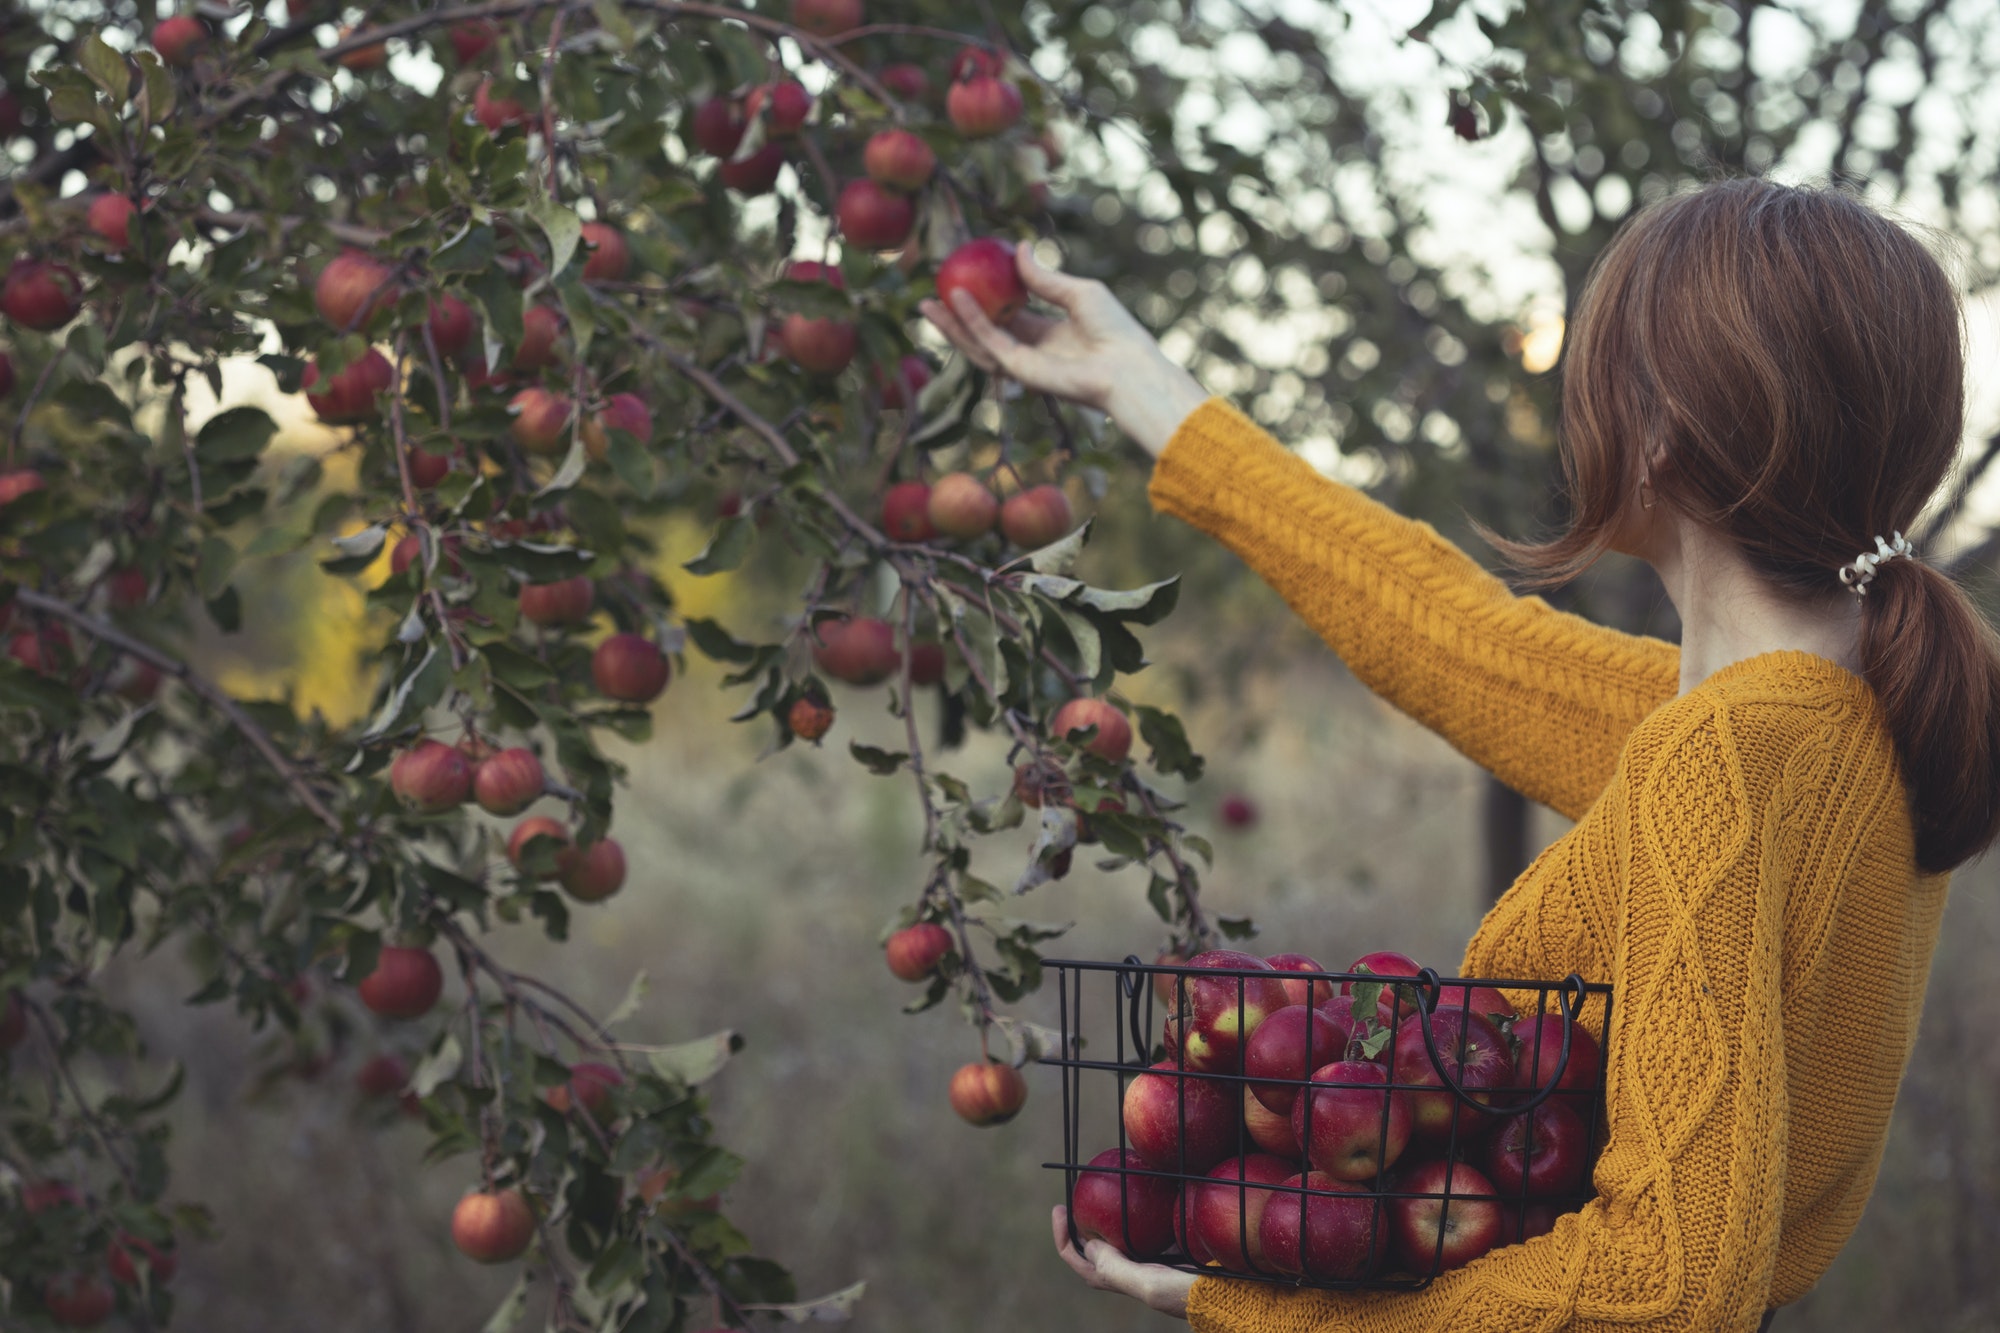 girl holds basket with juicy apples in the garden